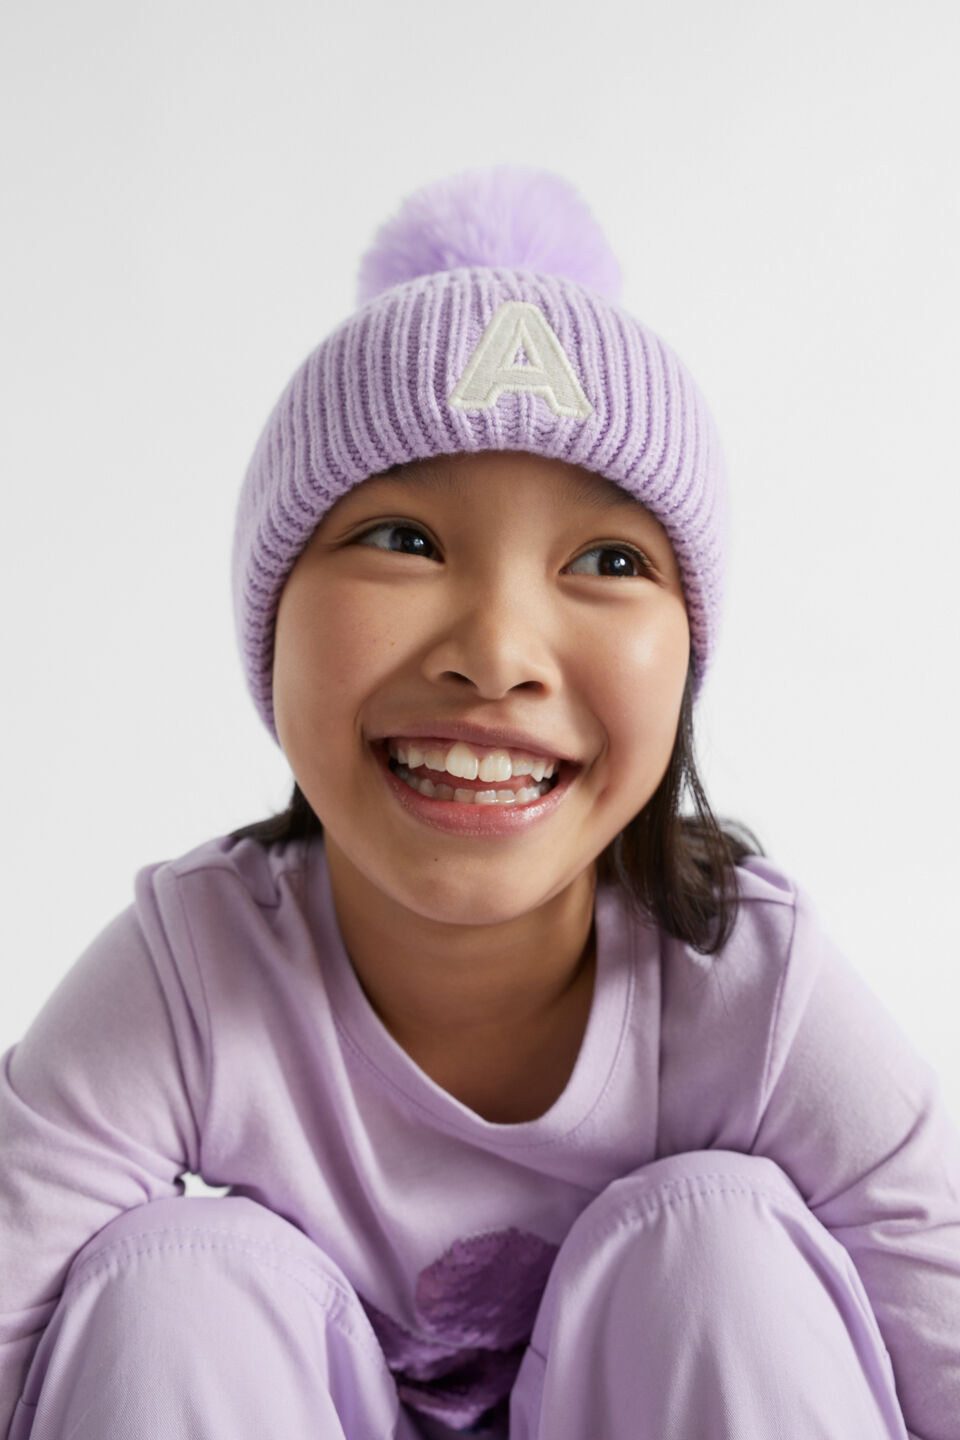 Embroidered Initial Beanie  W